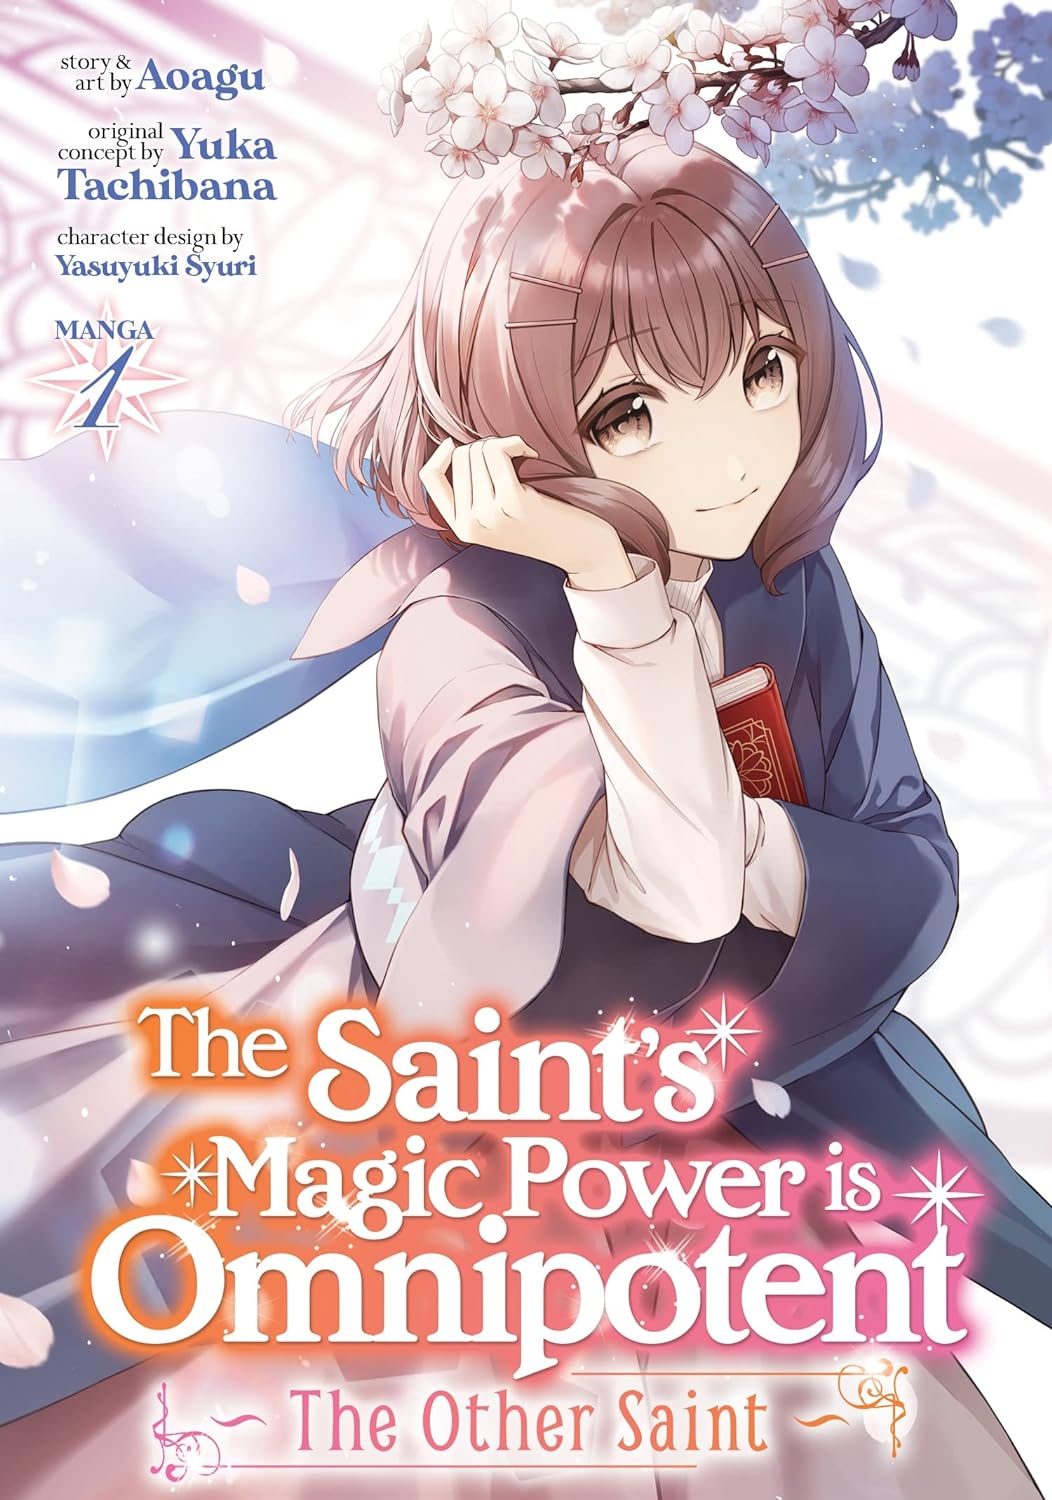 The Saint's Magic Power Is Omnipotent: The Other Saint (Manga)